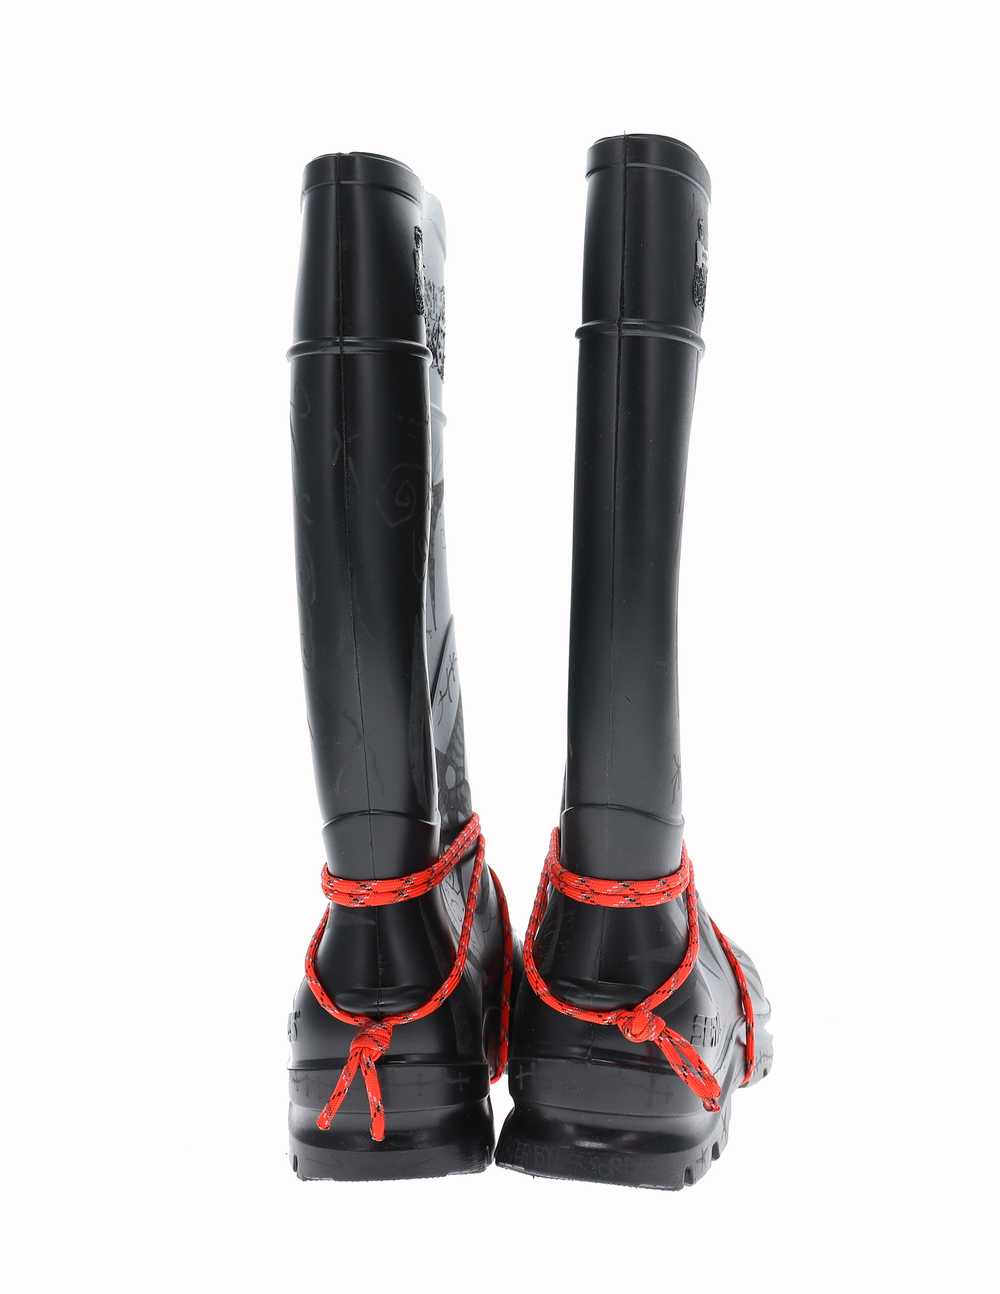 OrderByDisorder 1/1 Engraved Rubber Boots - image 8